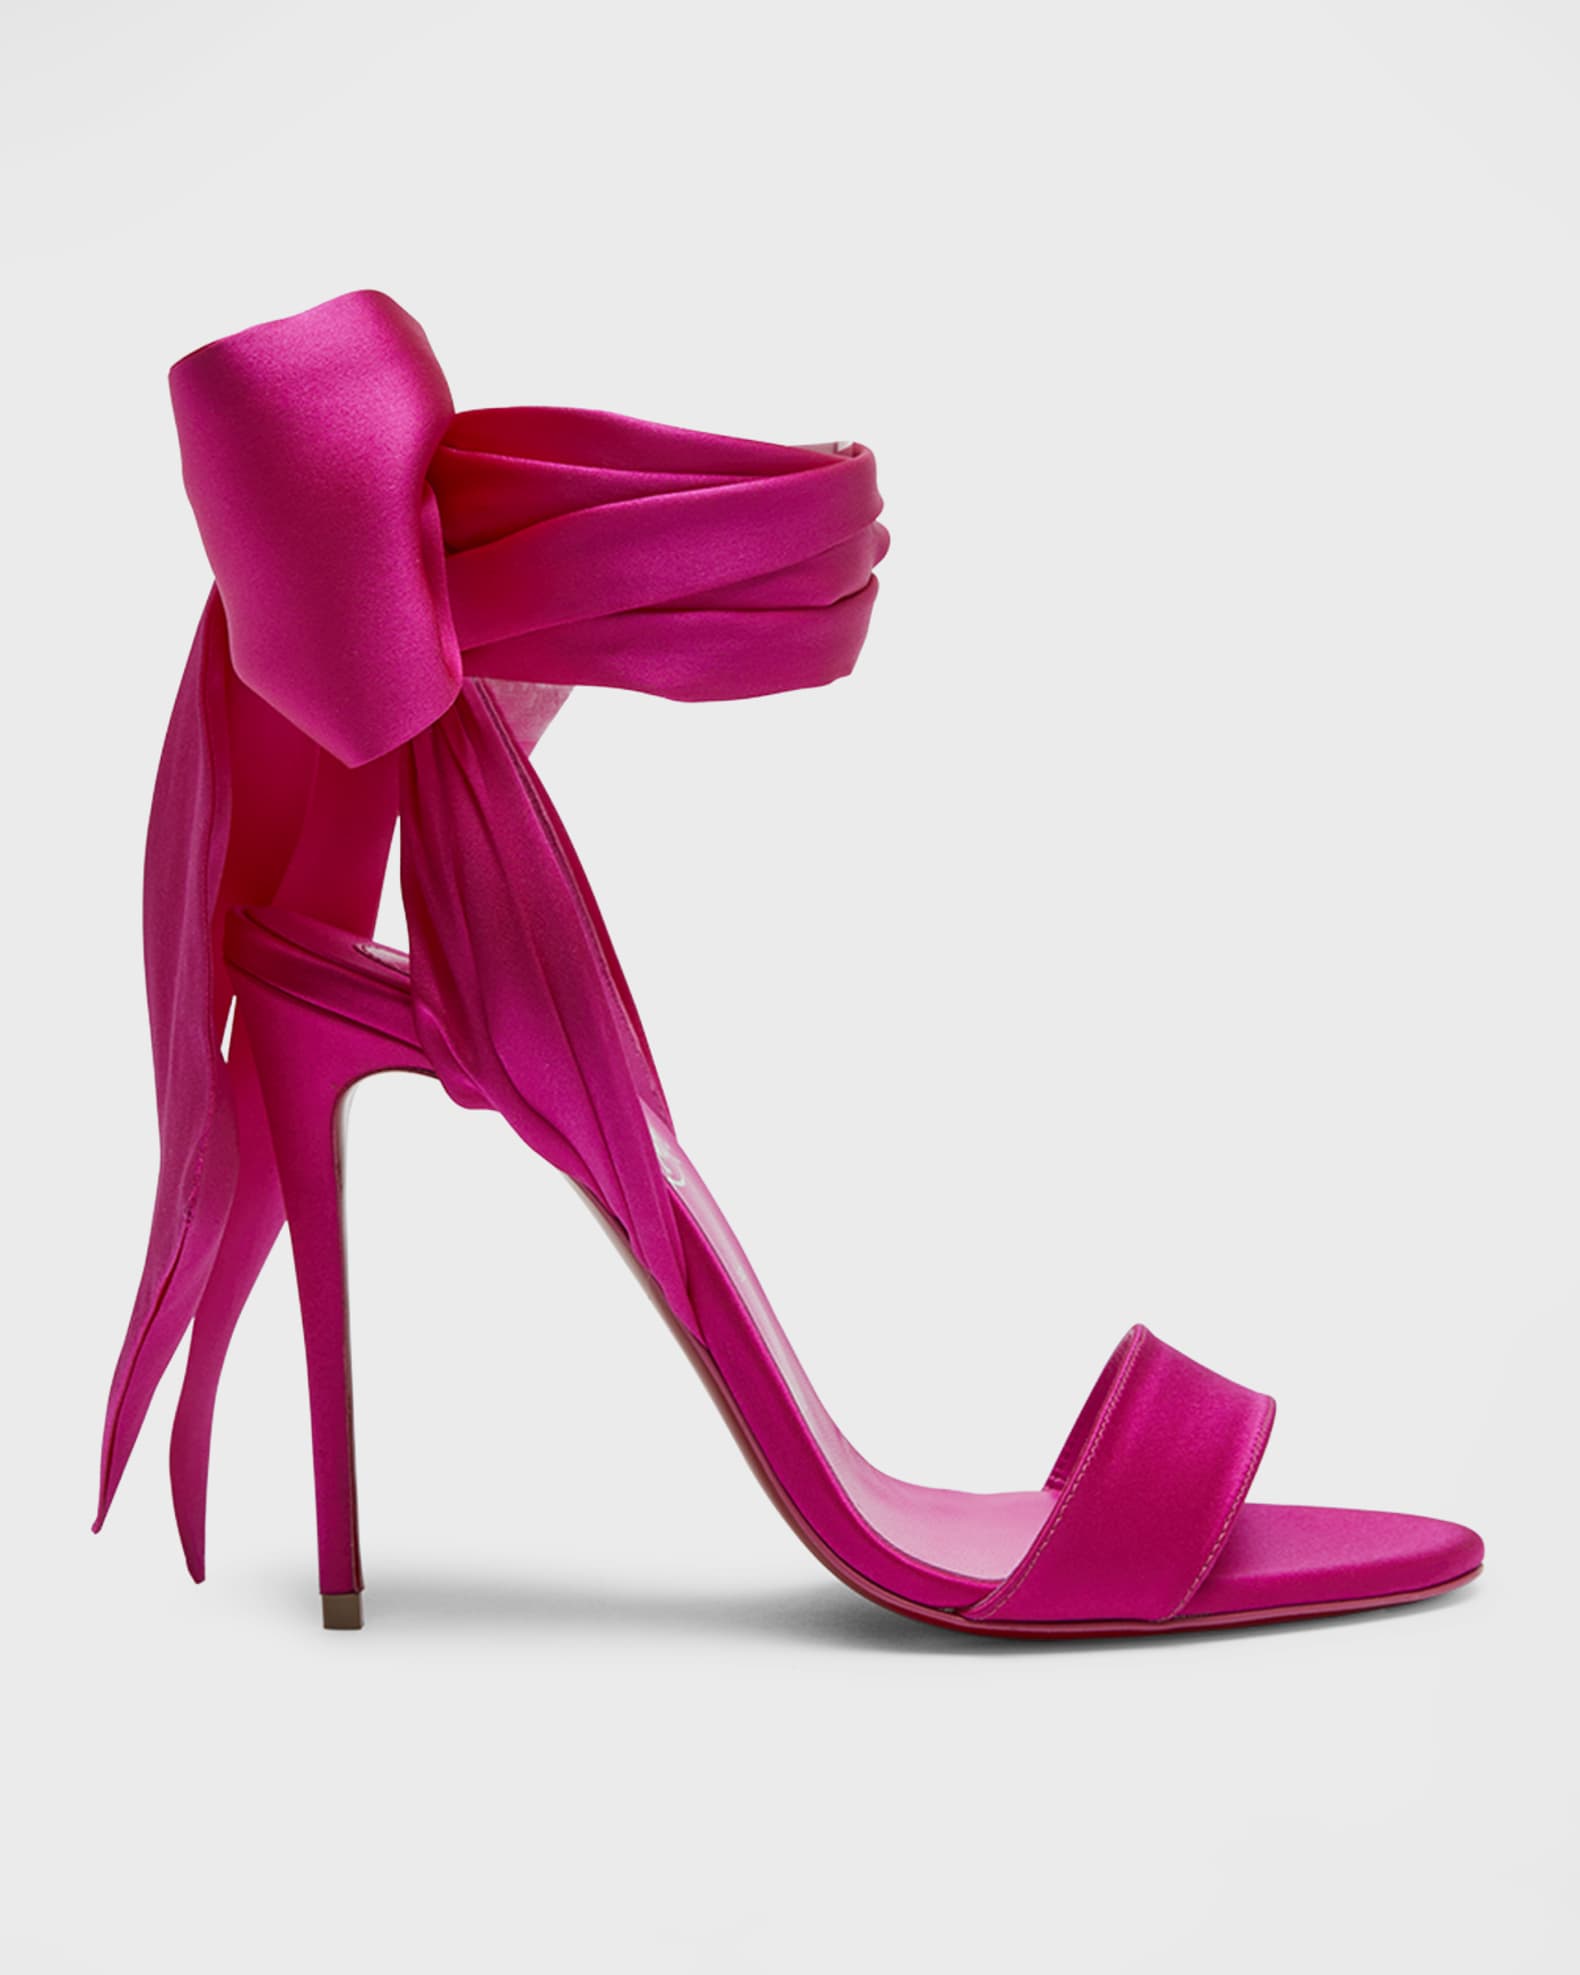 Pink diamond vamp shoes $150 in 2023